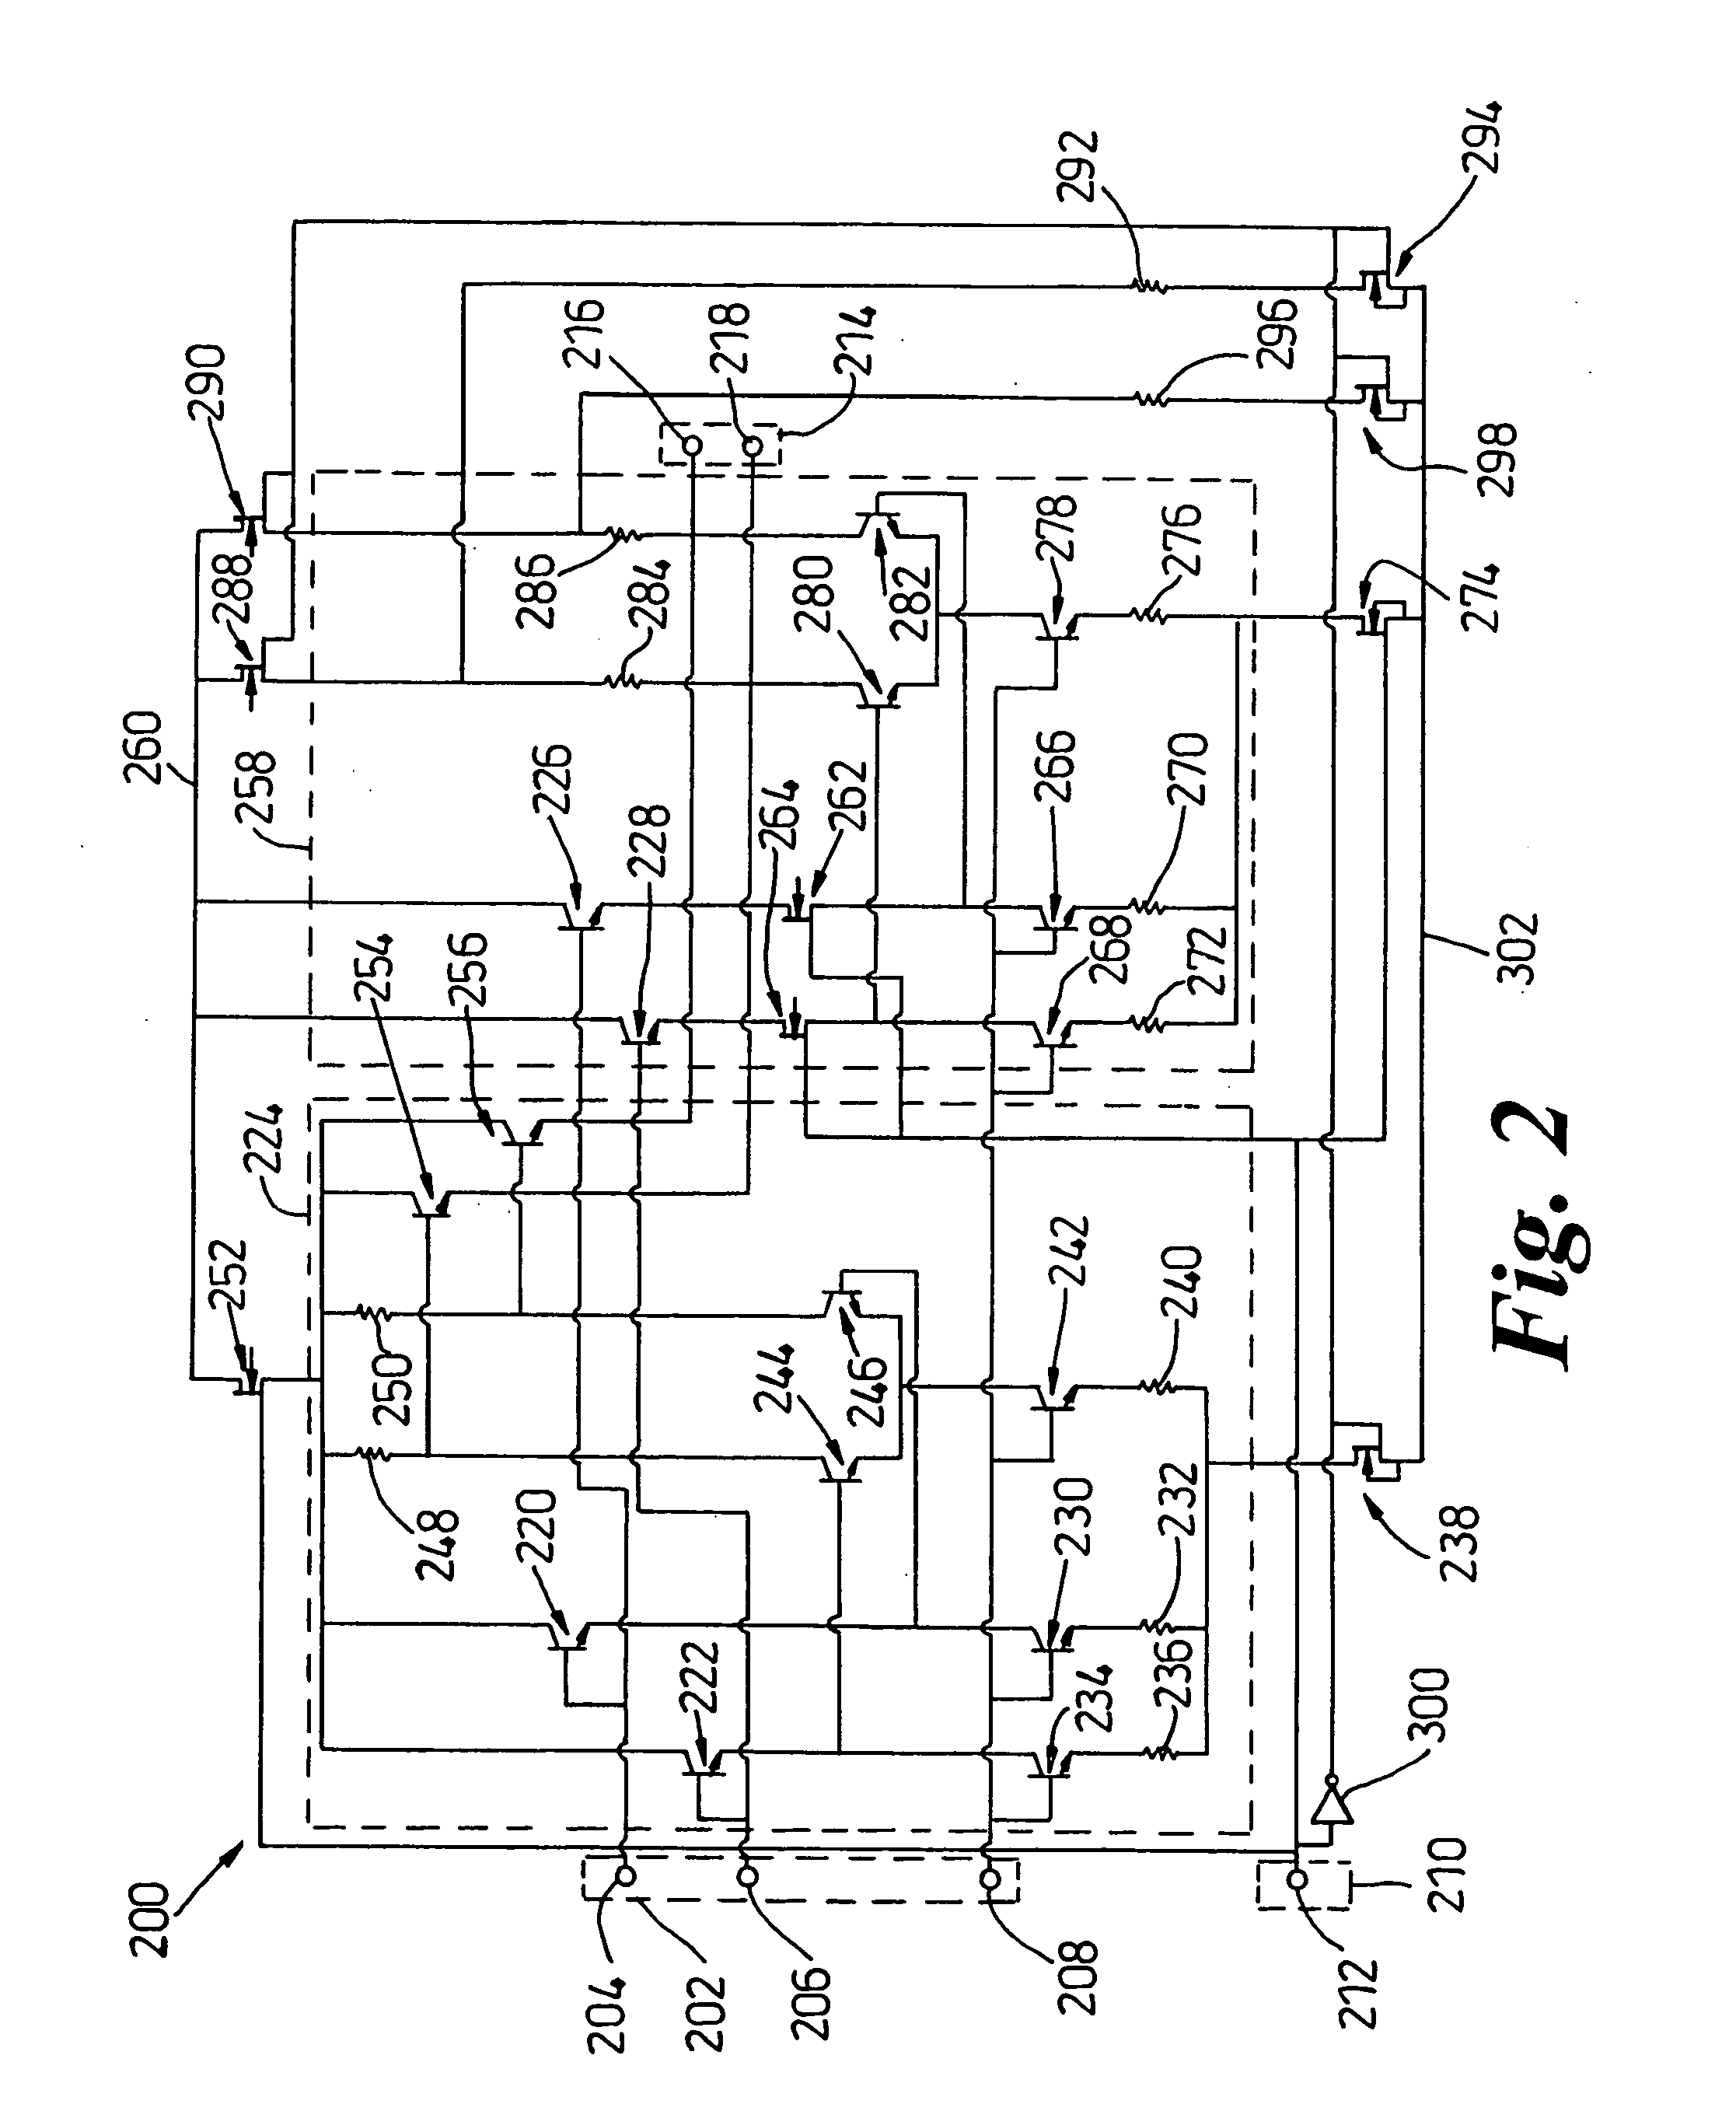 Integrated circuit and method of improving signal integrity